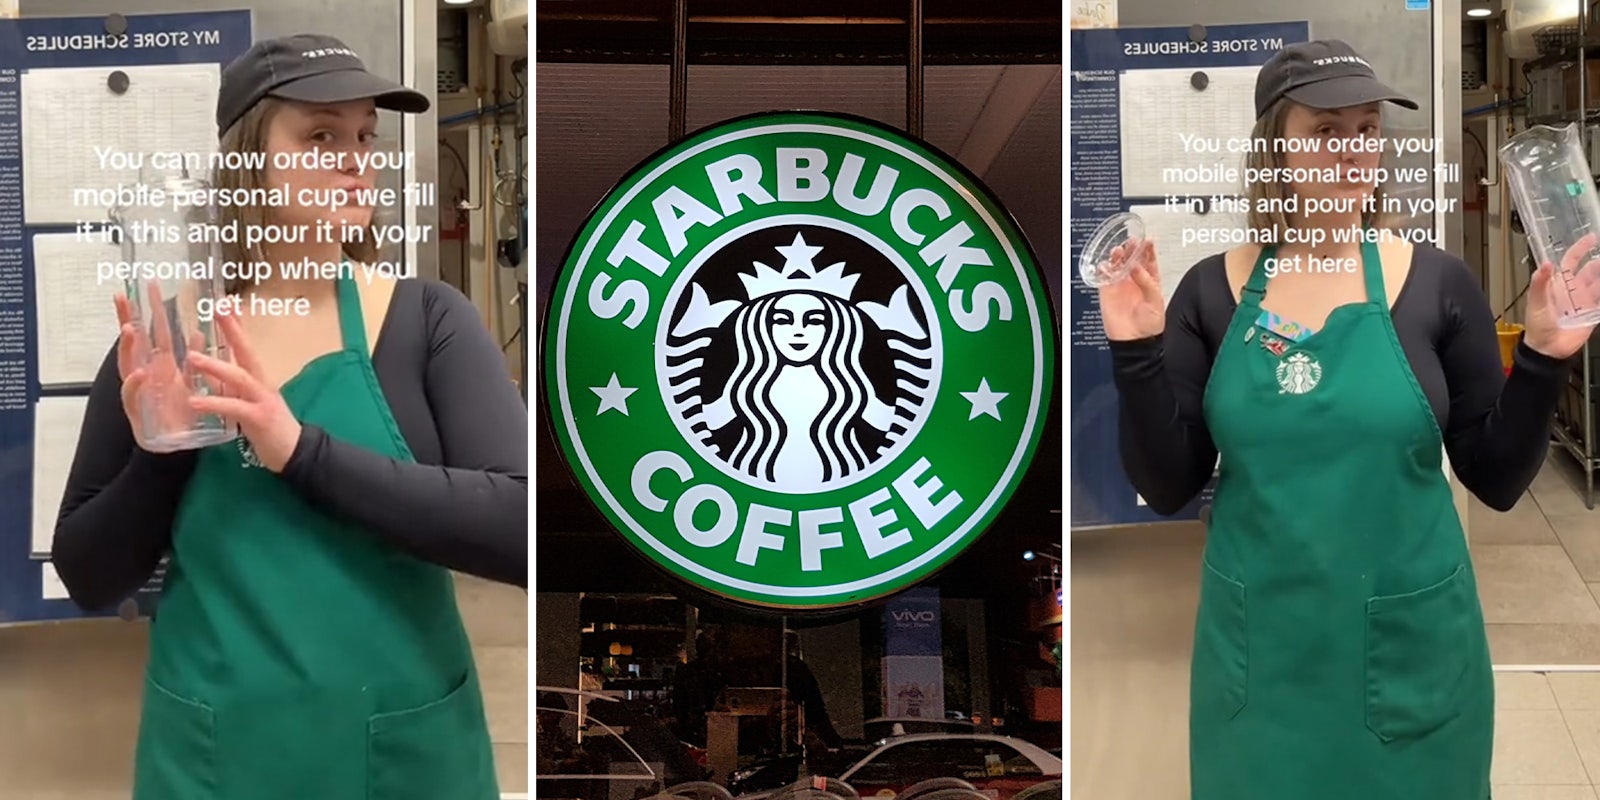 Starbucks now allows customers to use personal cups for mobile orders